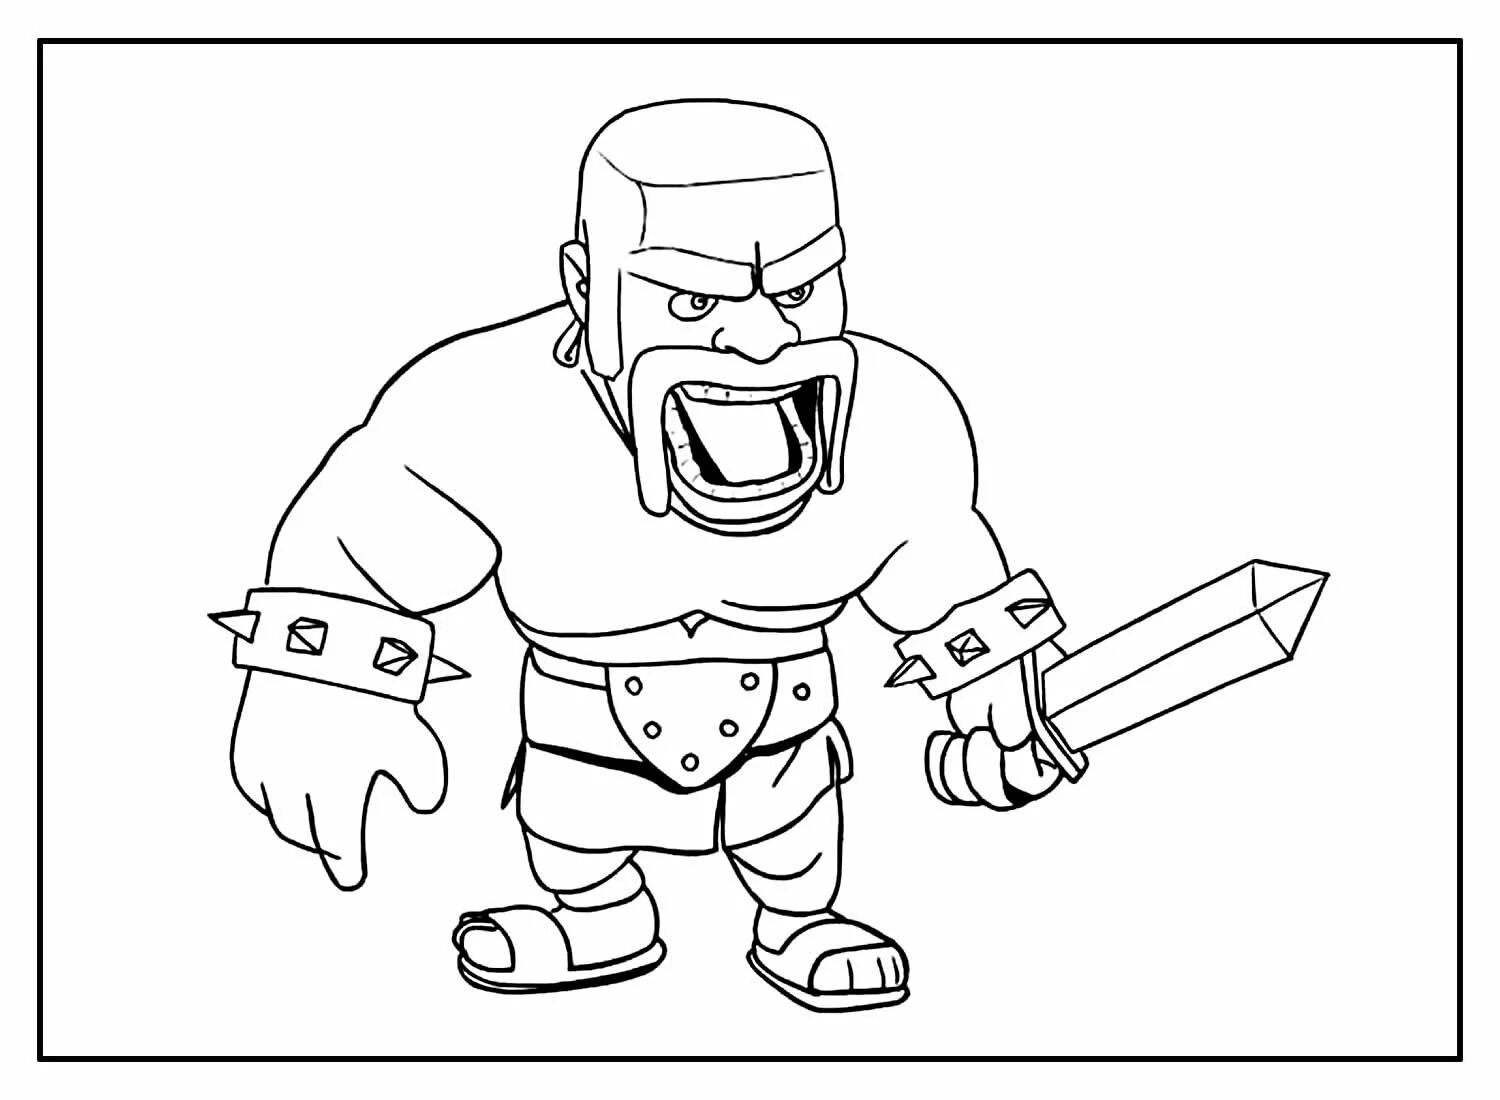 Relaxing clash royale arena coloring page